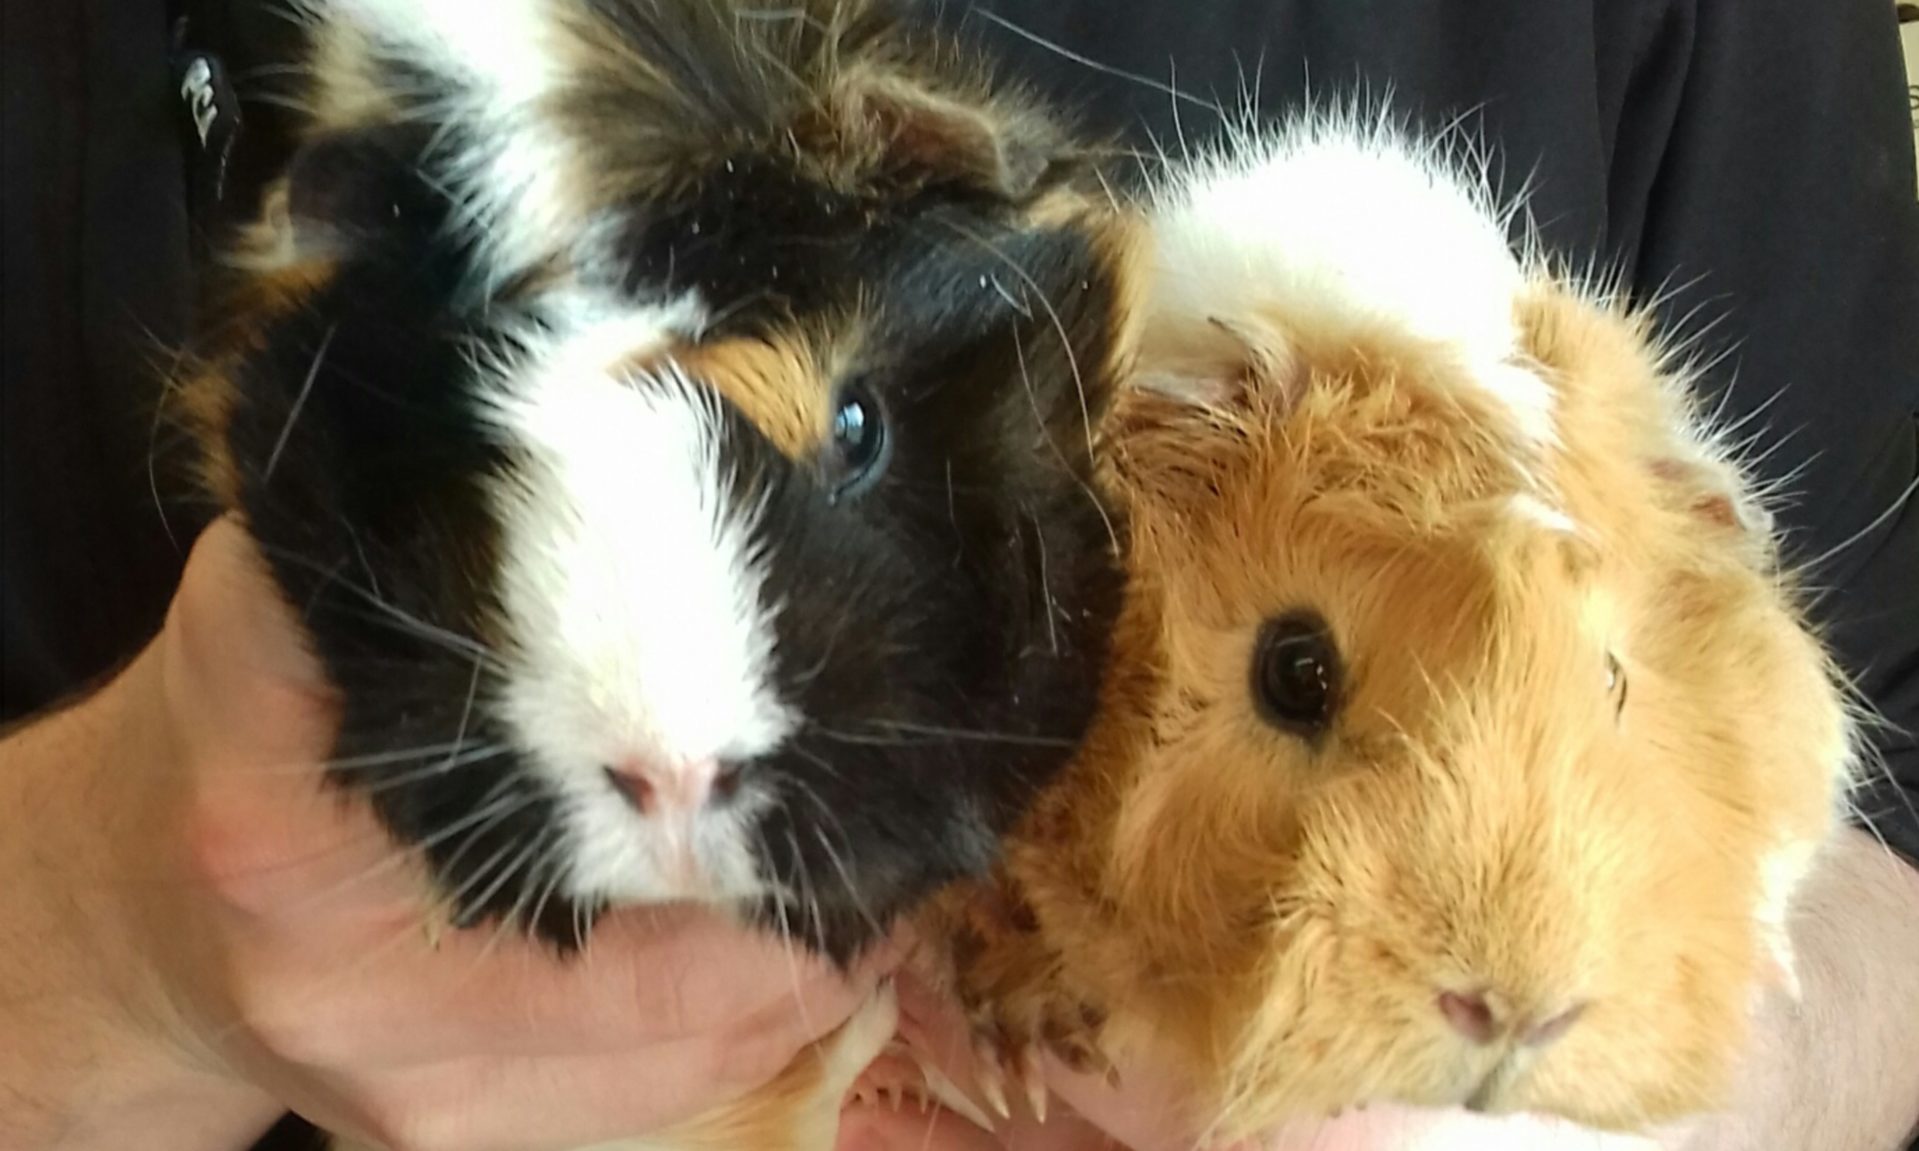 Guinea pigs Robyn and Susan were dumped in their cage in a Glenrothes garage